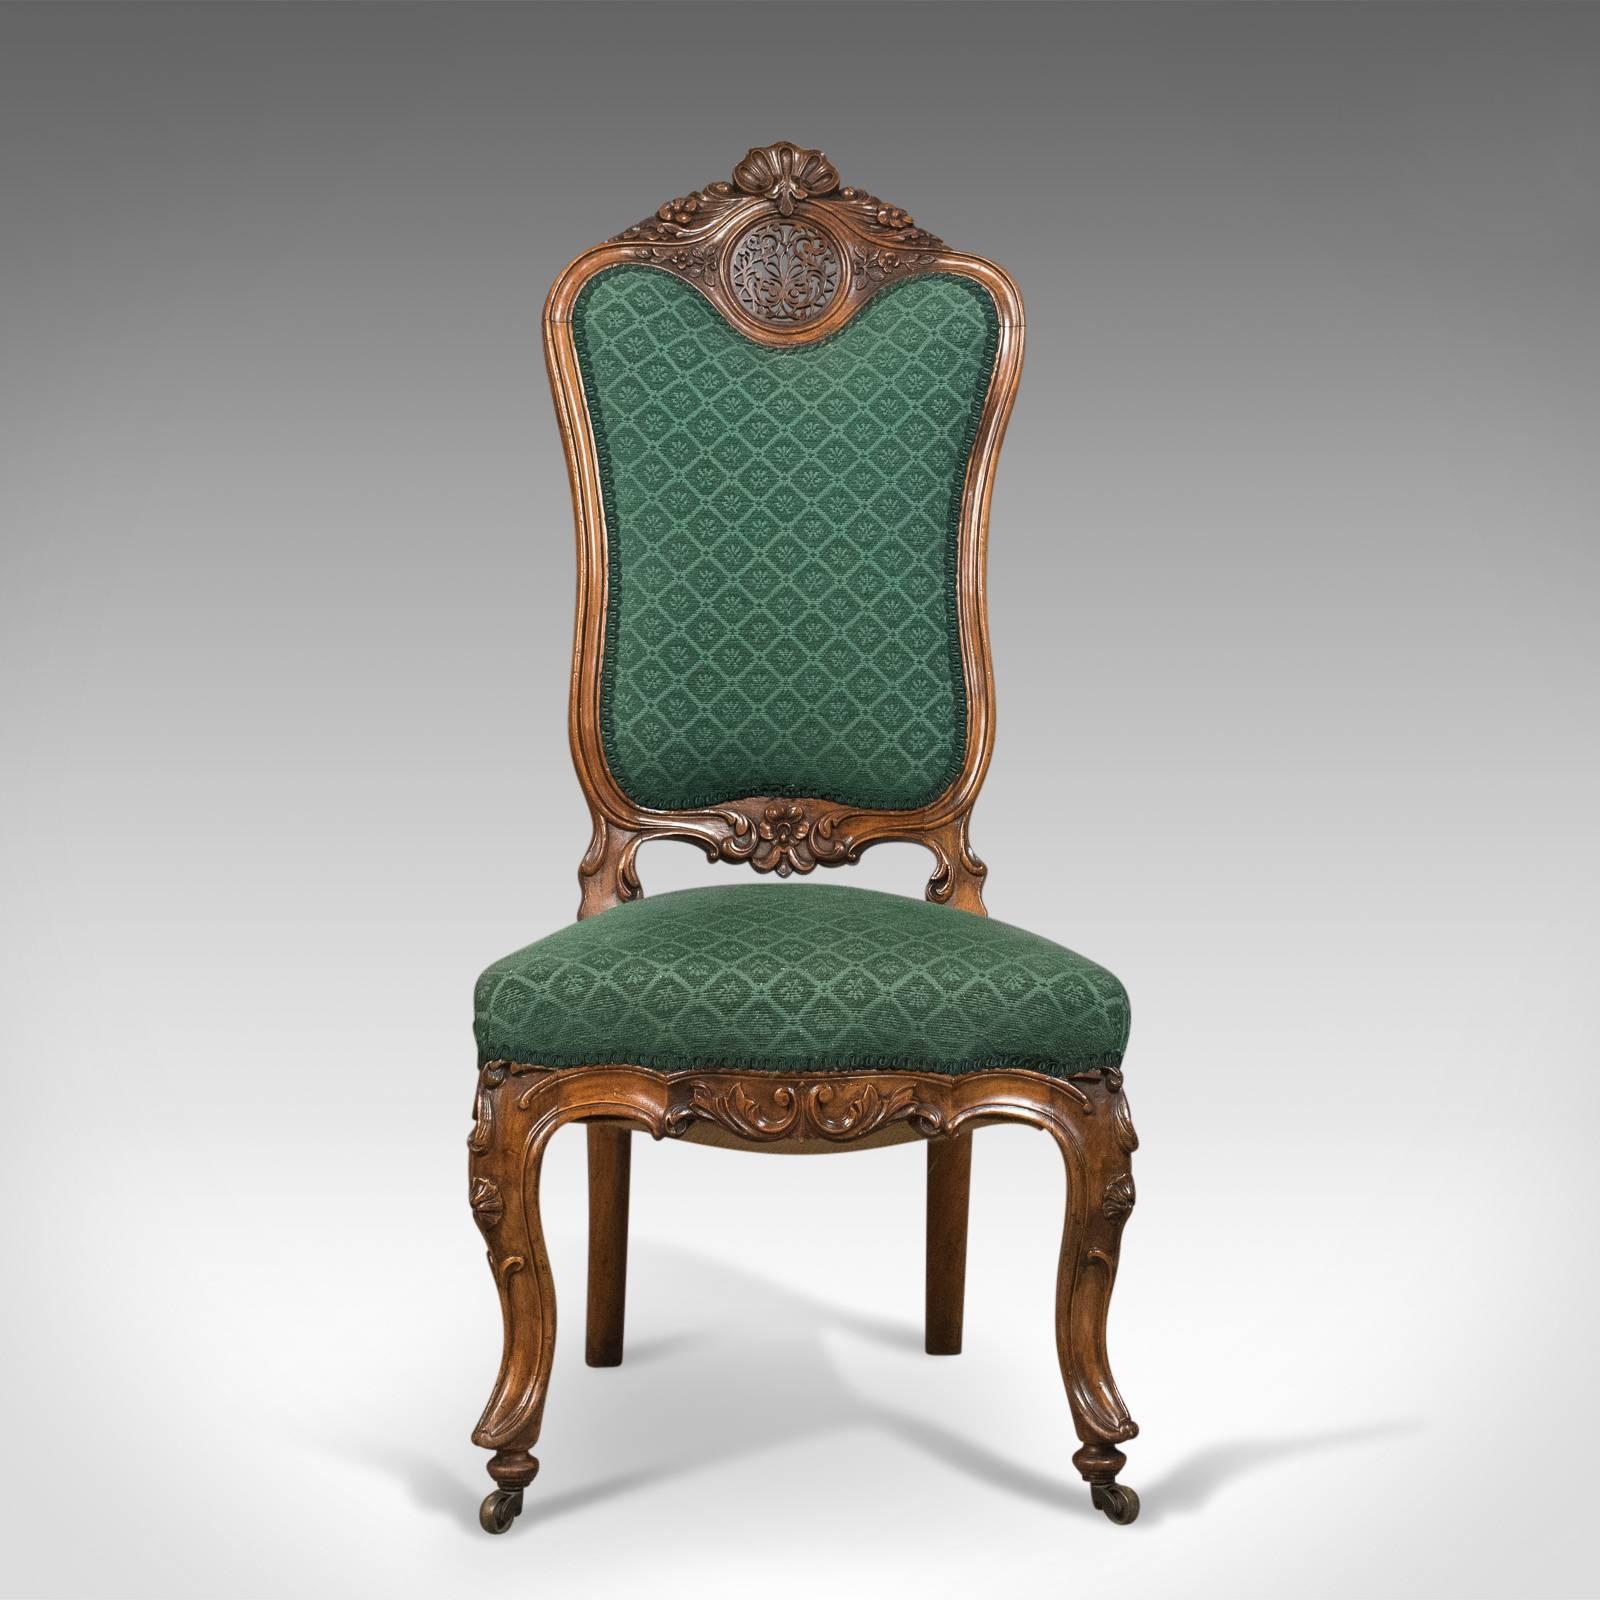 This is an antique side chair, a 19th century nursing or salon chair in English walnut dating to the early 19th century, circa 1820.

A superior example in fine condition
The English walnut frame displaying good colour, grain interest and a